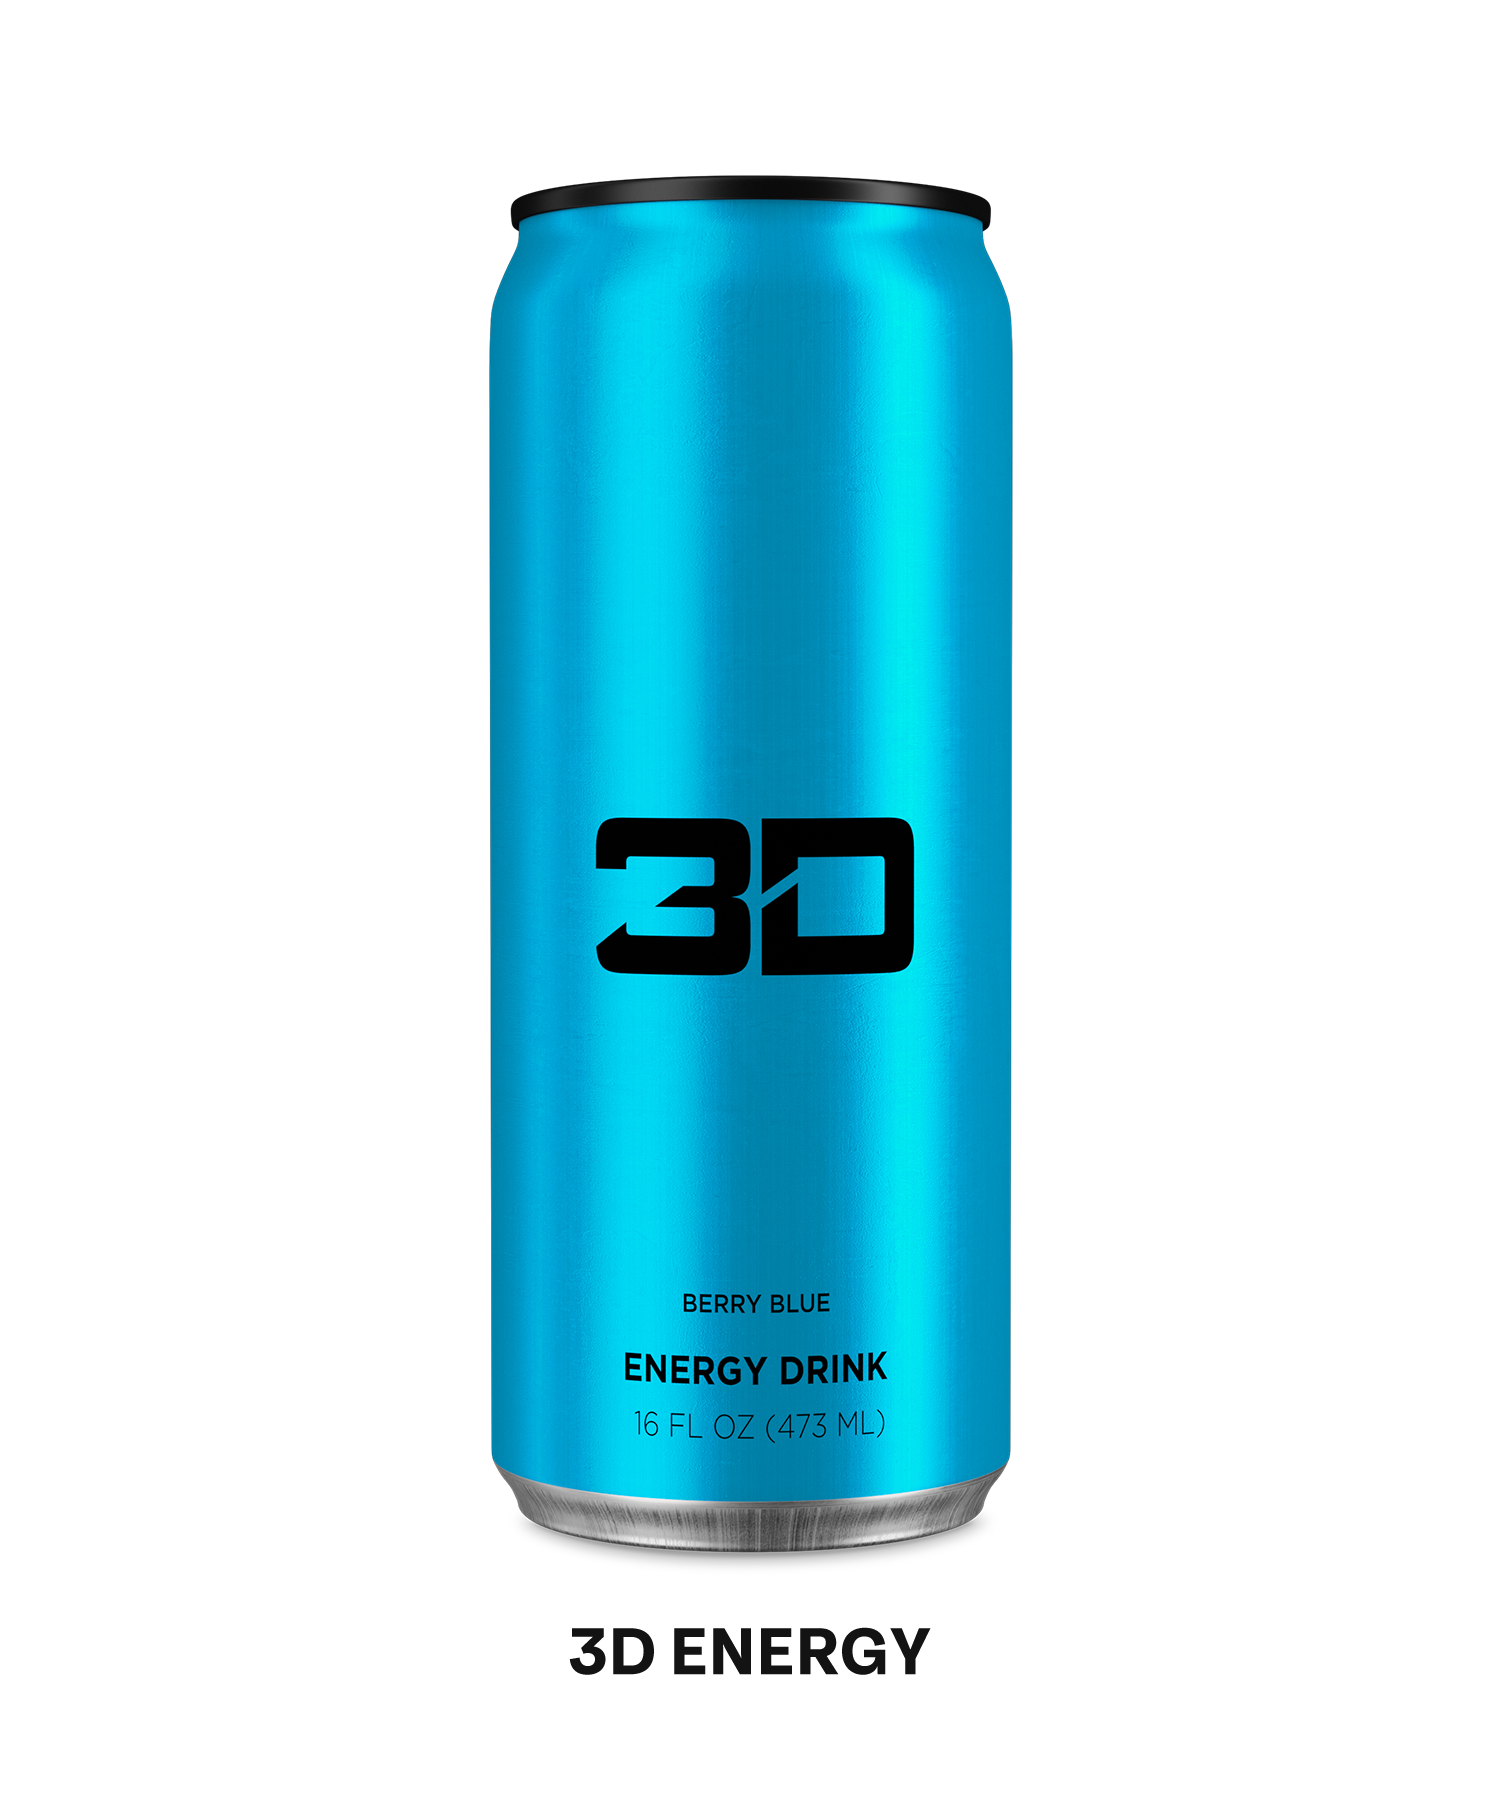 A 16 fl oz 3D energy drink in flavor berry blue.